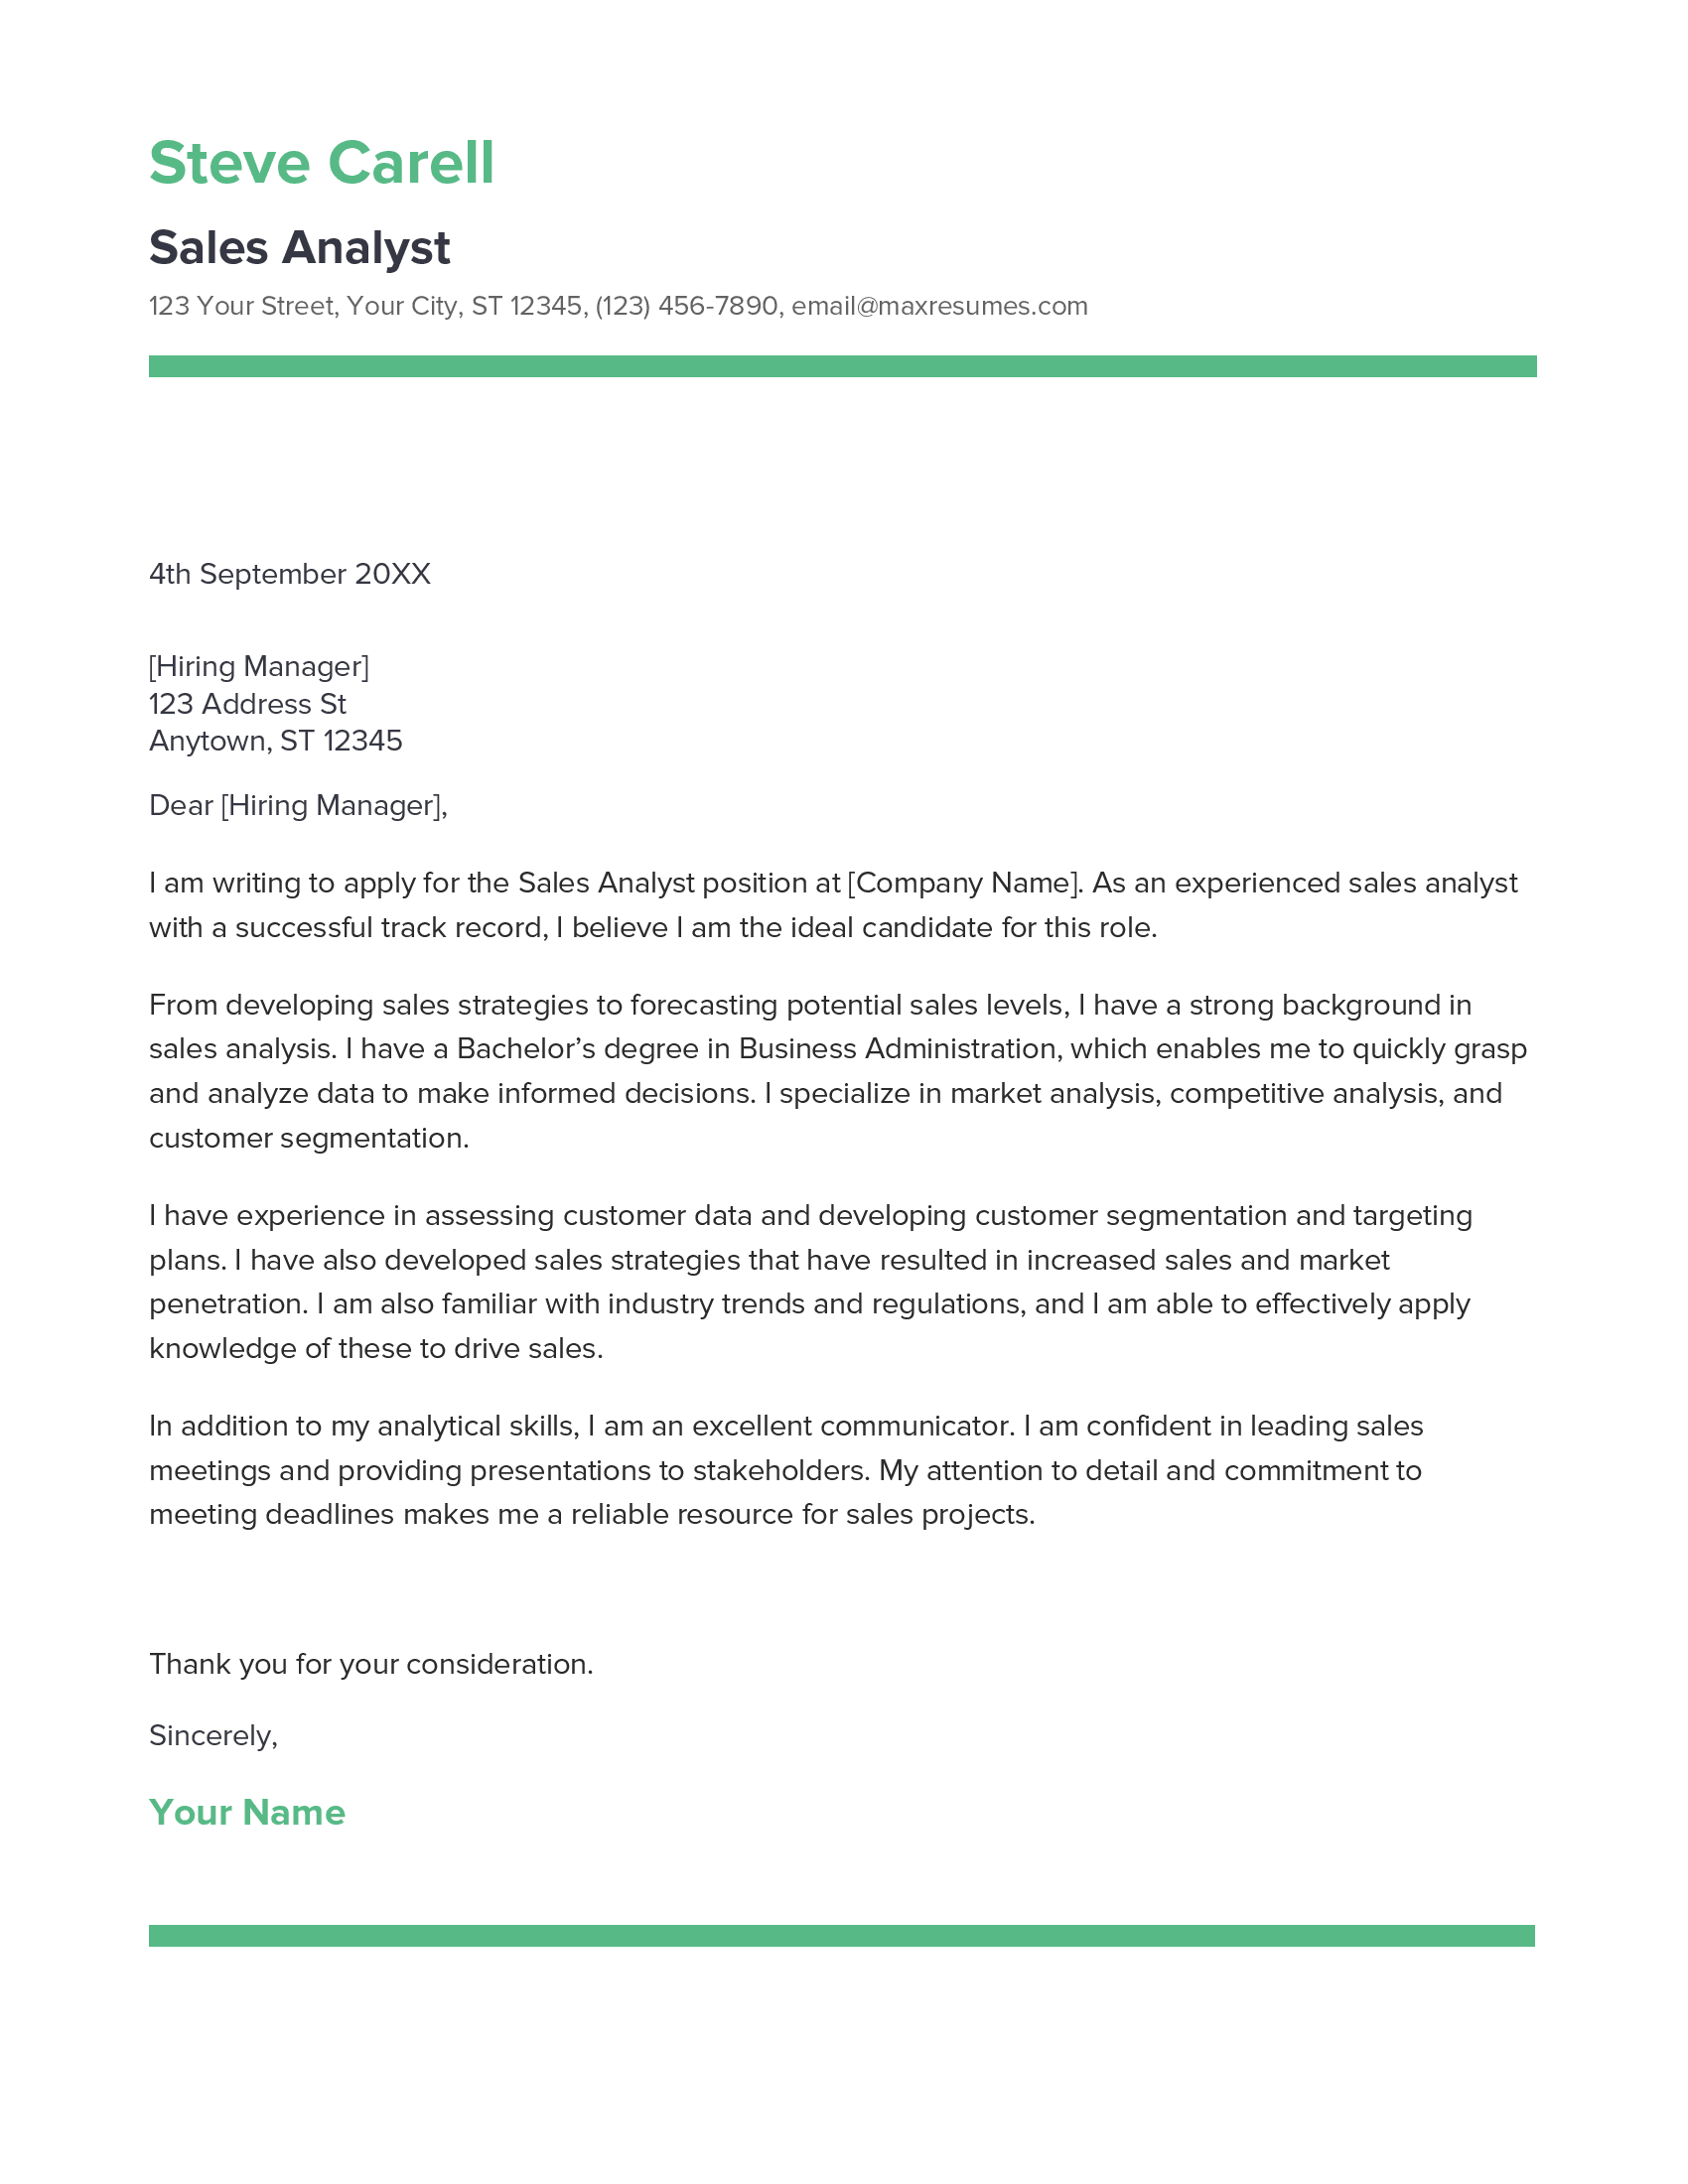 Sales Analyst Cover Letter Example